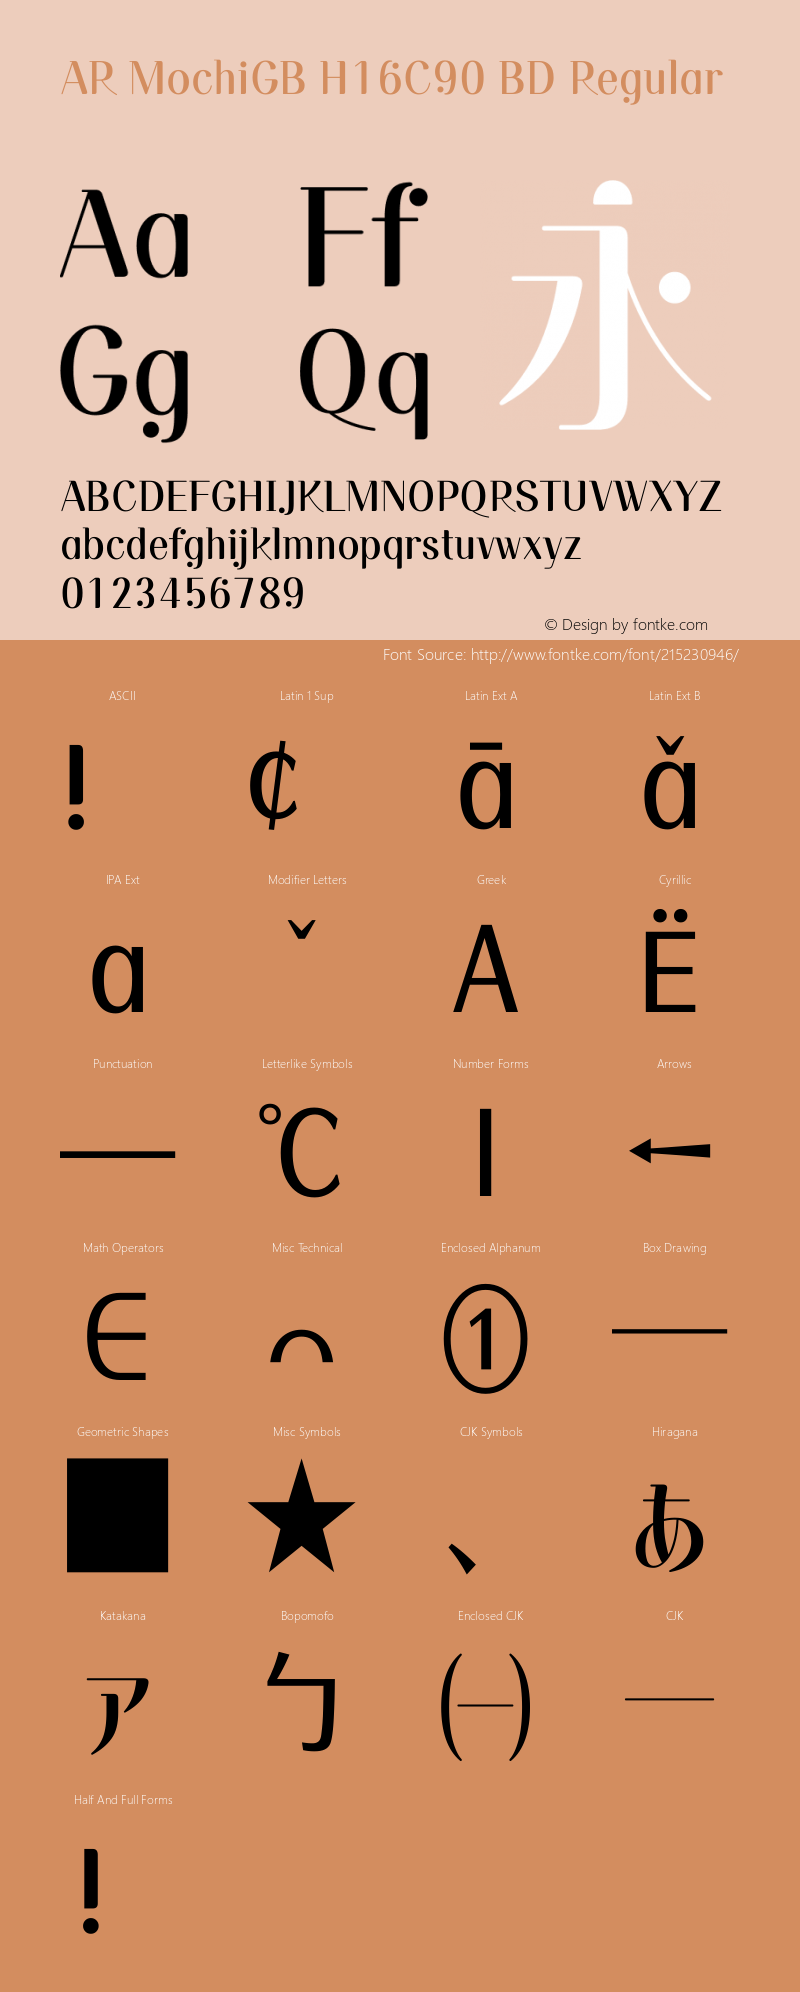 AR MochiGB H16C90 BD Version 1.00 - This font set is licensed to 